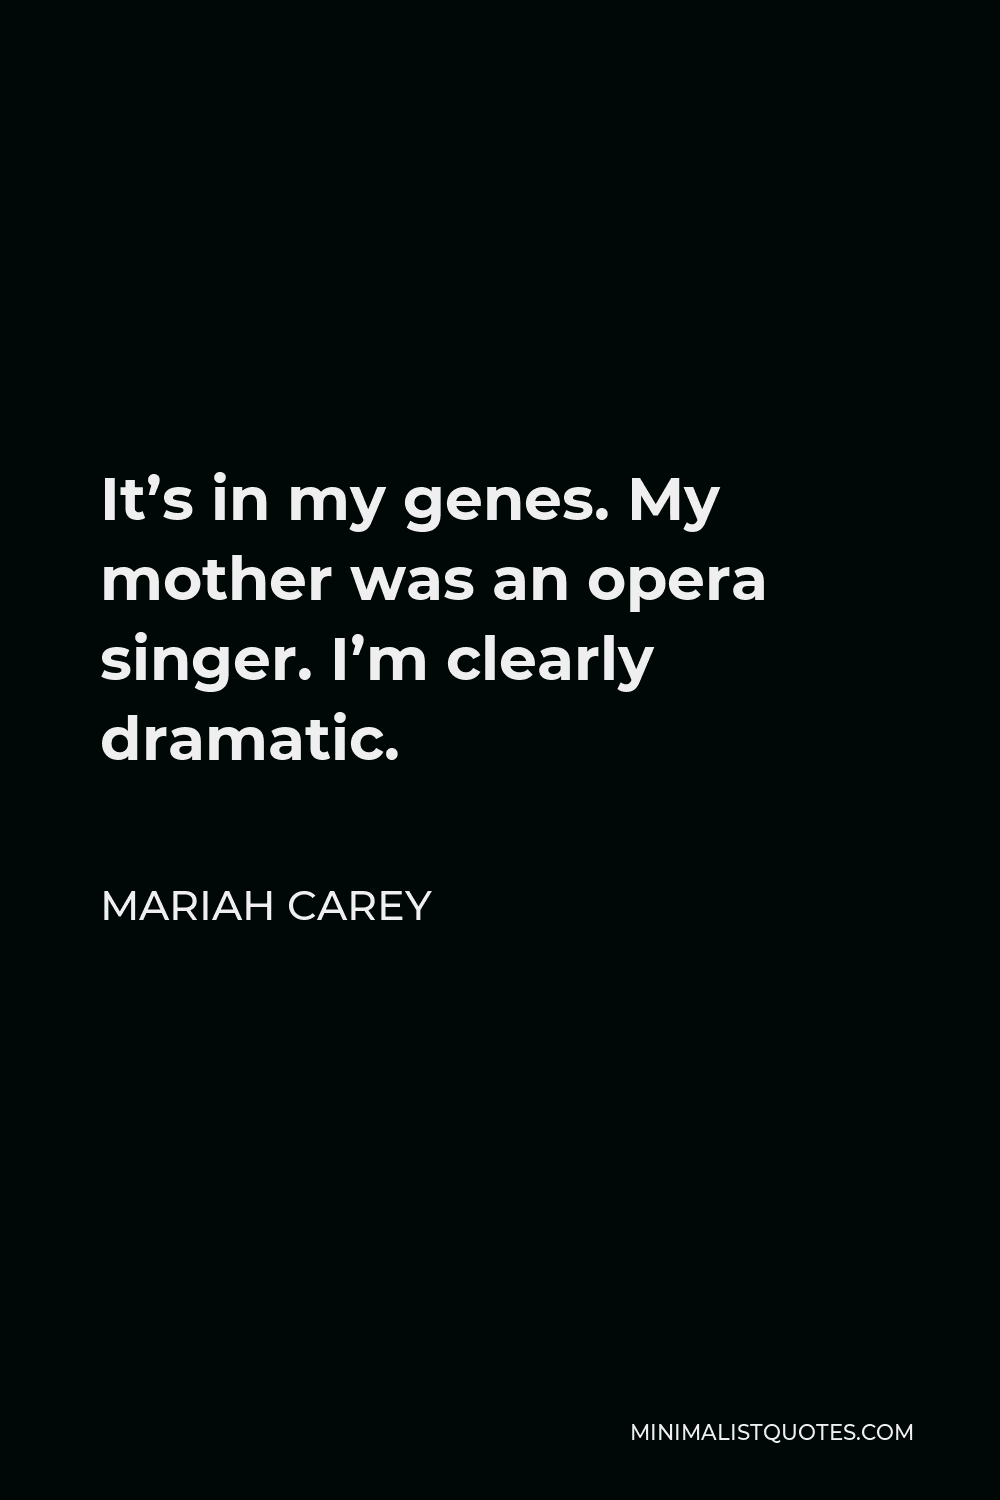 Mariah Carey Quote - It’s in my genes. My mother was an opera singer. I’m clearly dramatic.